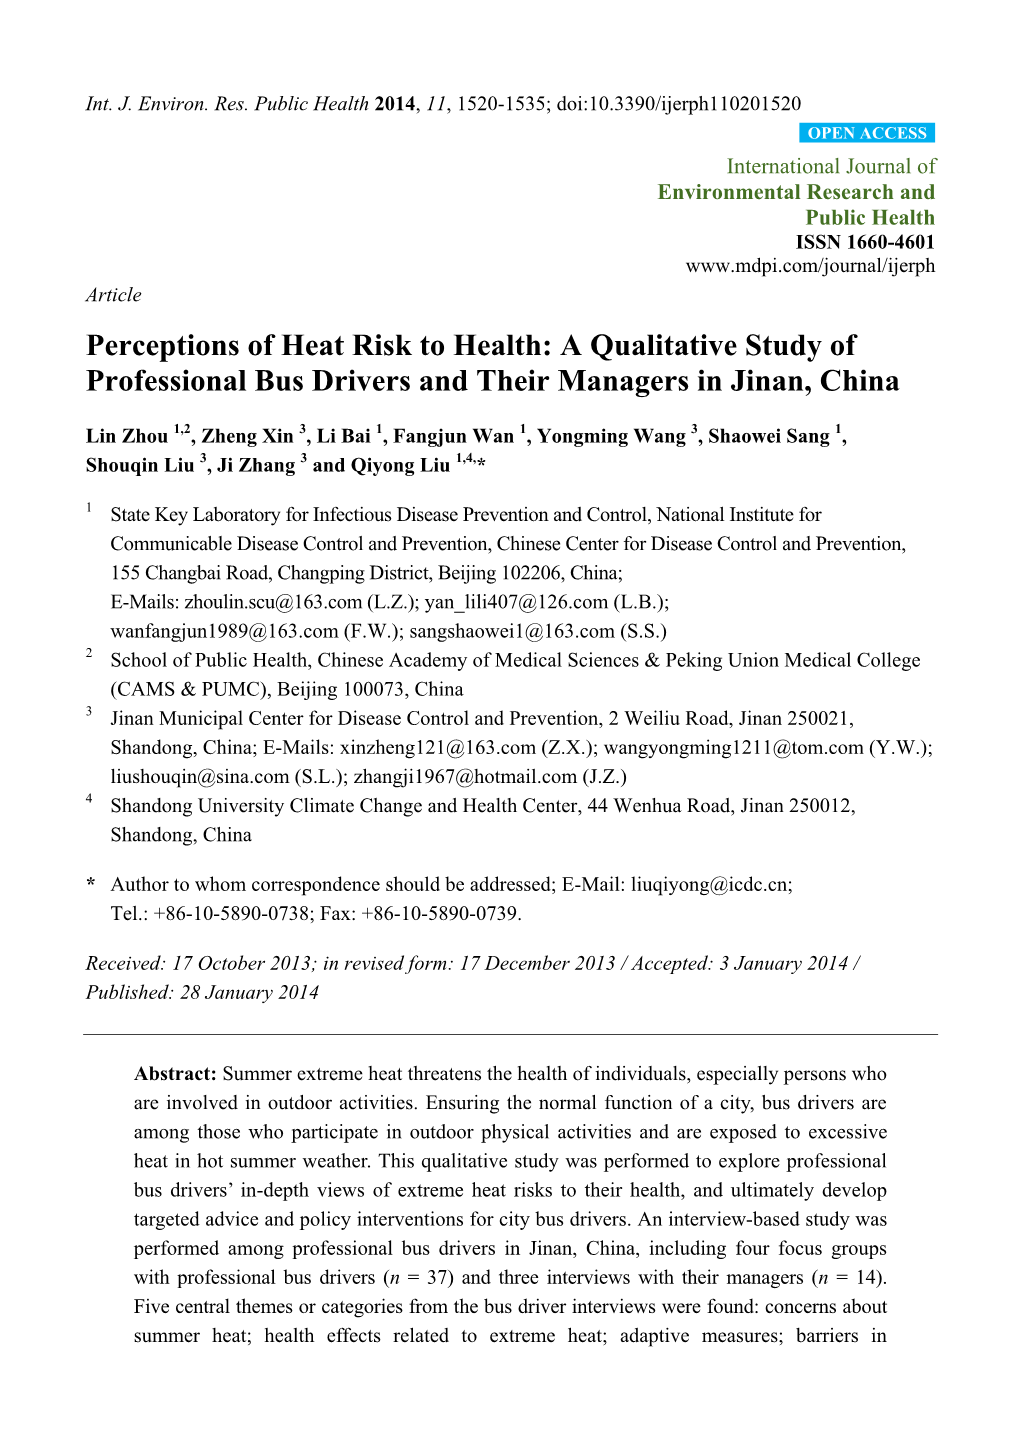 Perceptions of Heat Risk to Health: a Qualitative Study of Professional Bus Drivers and Their Managers in Jinan, China